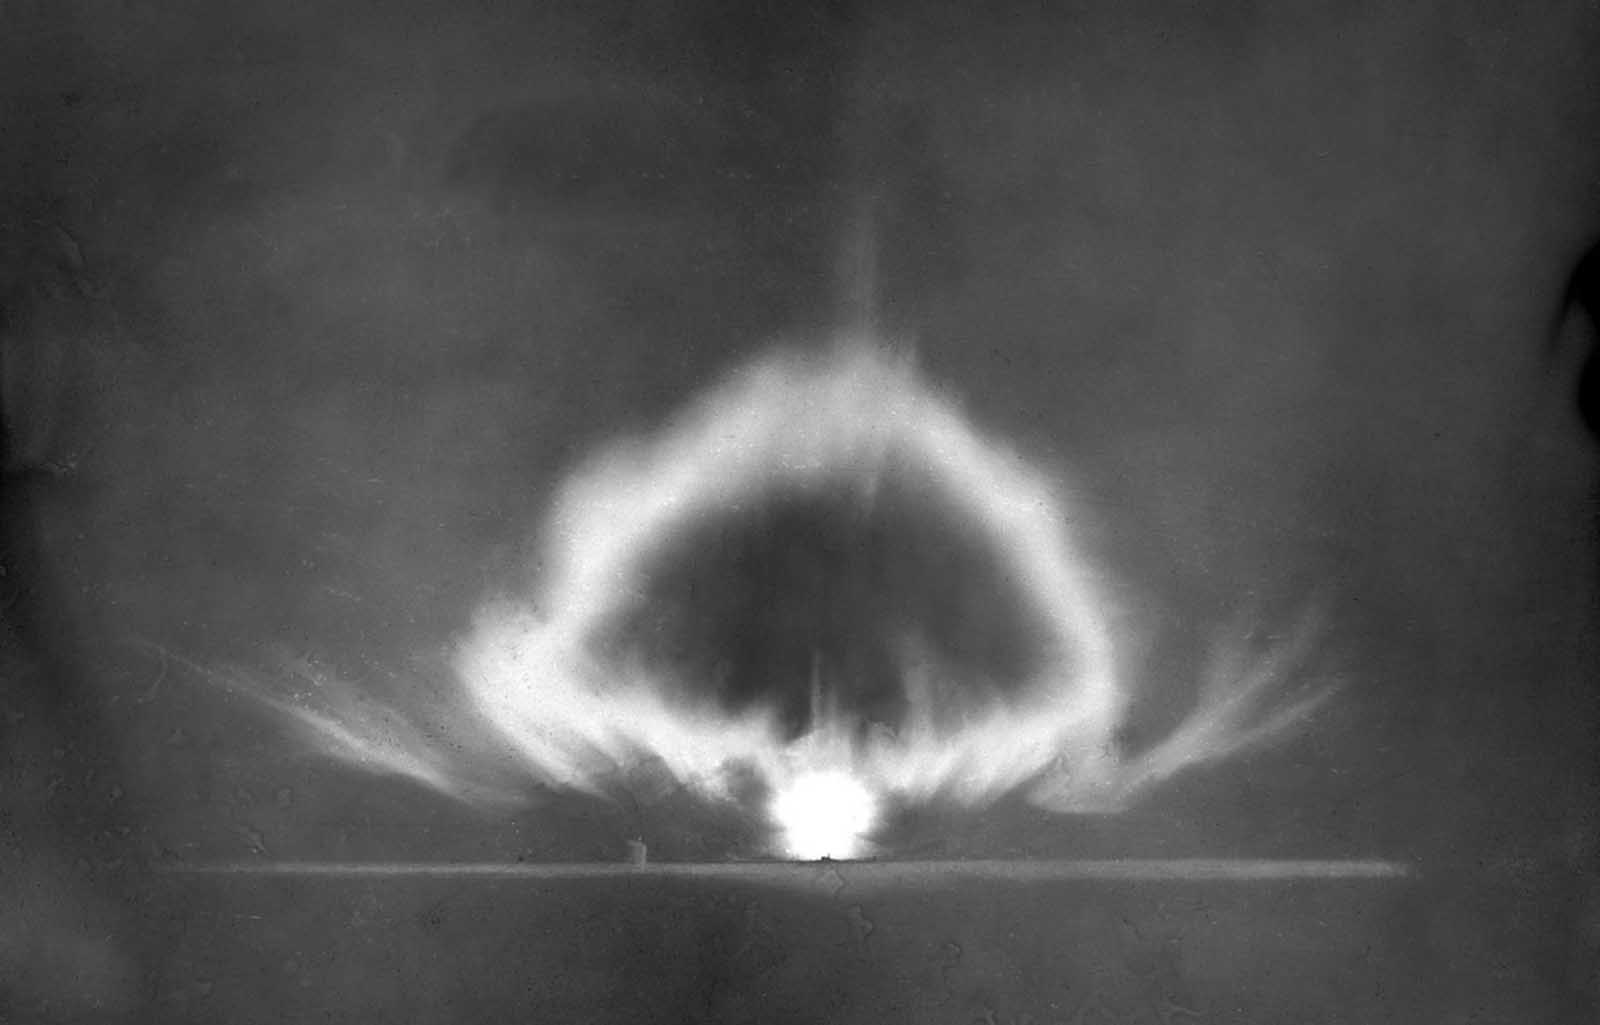 A longer-exposure photograph of the Trinity explosion seconds after detonation on July 16, 1945.